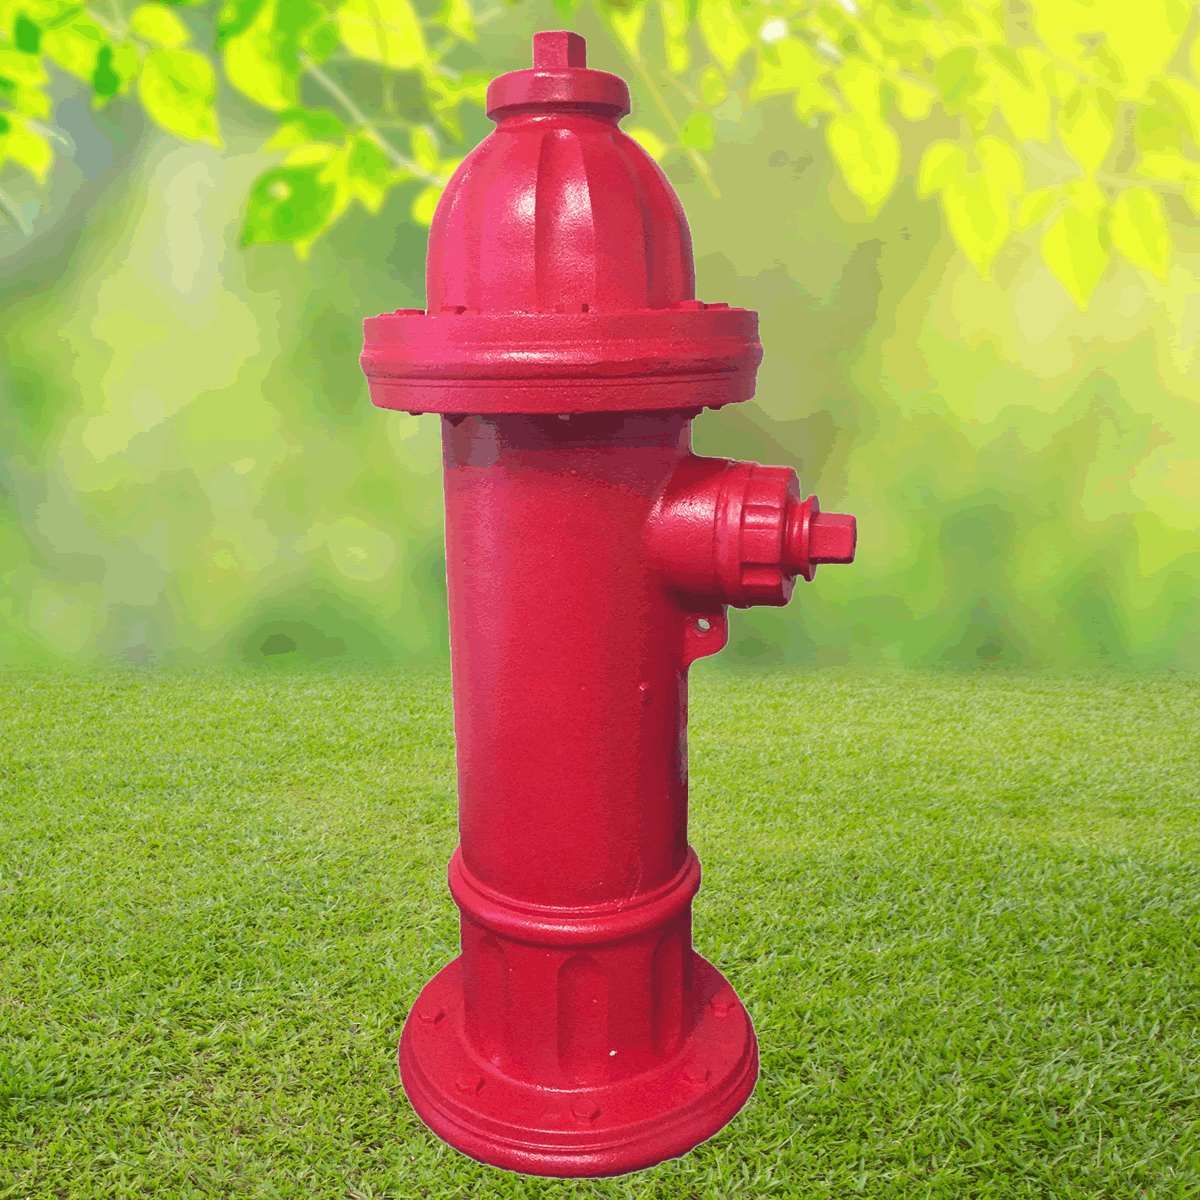 Playgrounds For Dogs Decorative Fire Hydrant